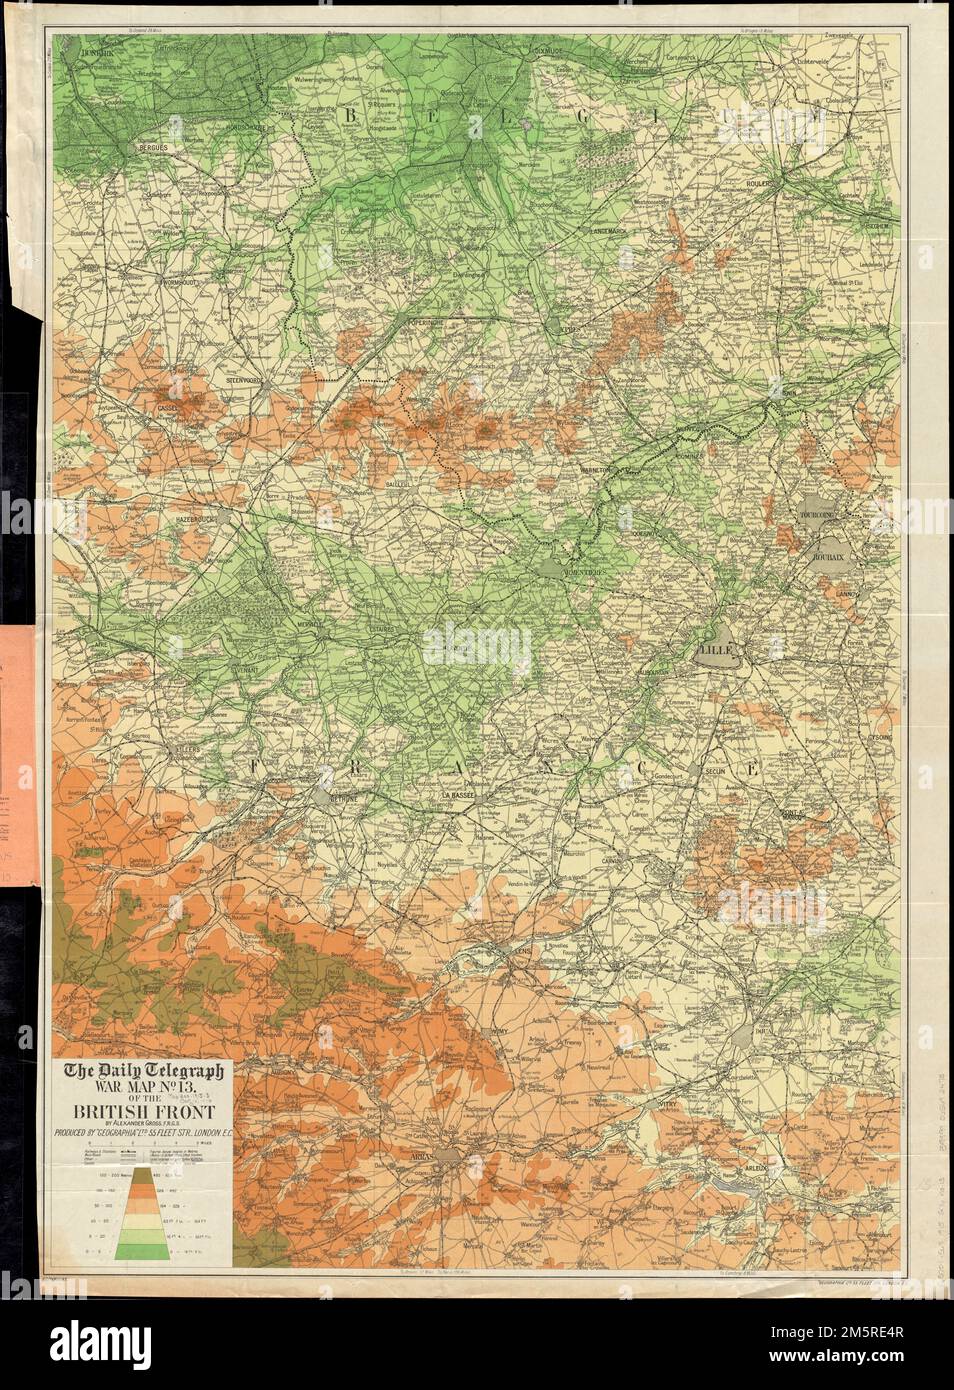 The Daily Telegraph war map no. 13 of the British front. Relief shown by gradient tints and spot heights. Area: from Dixmude to Blaireville ; from Aire to Toufflers. Shows place names, roads, railroads, approximate position of Allied Front prior to the Battle of the Somme... Daily Telegraph war map of the new British front in contour colouring (No. 13). Daily Telegraph war map of the new British front in contour colouring (No. 13), France Belgium Stock Photo